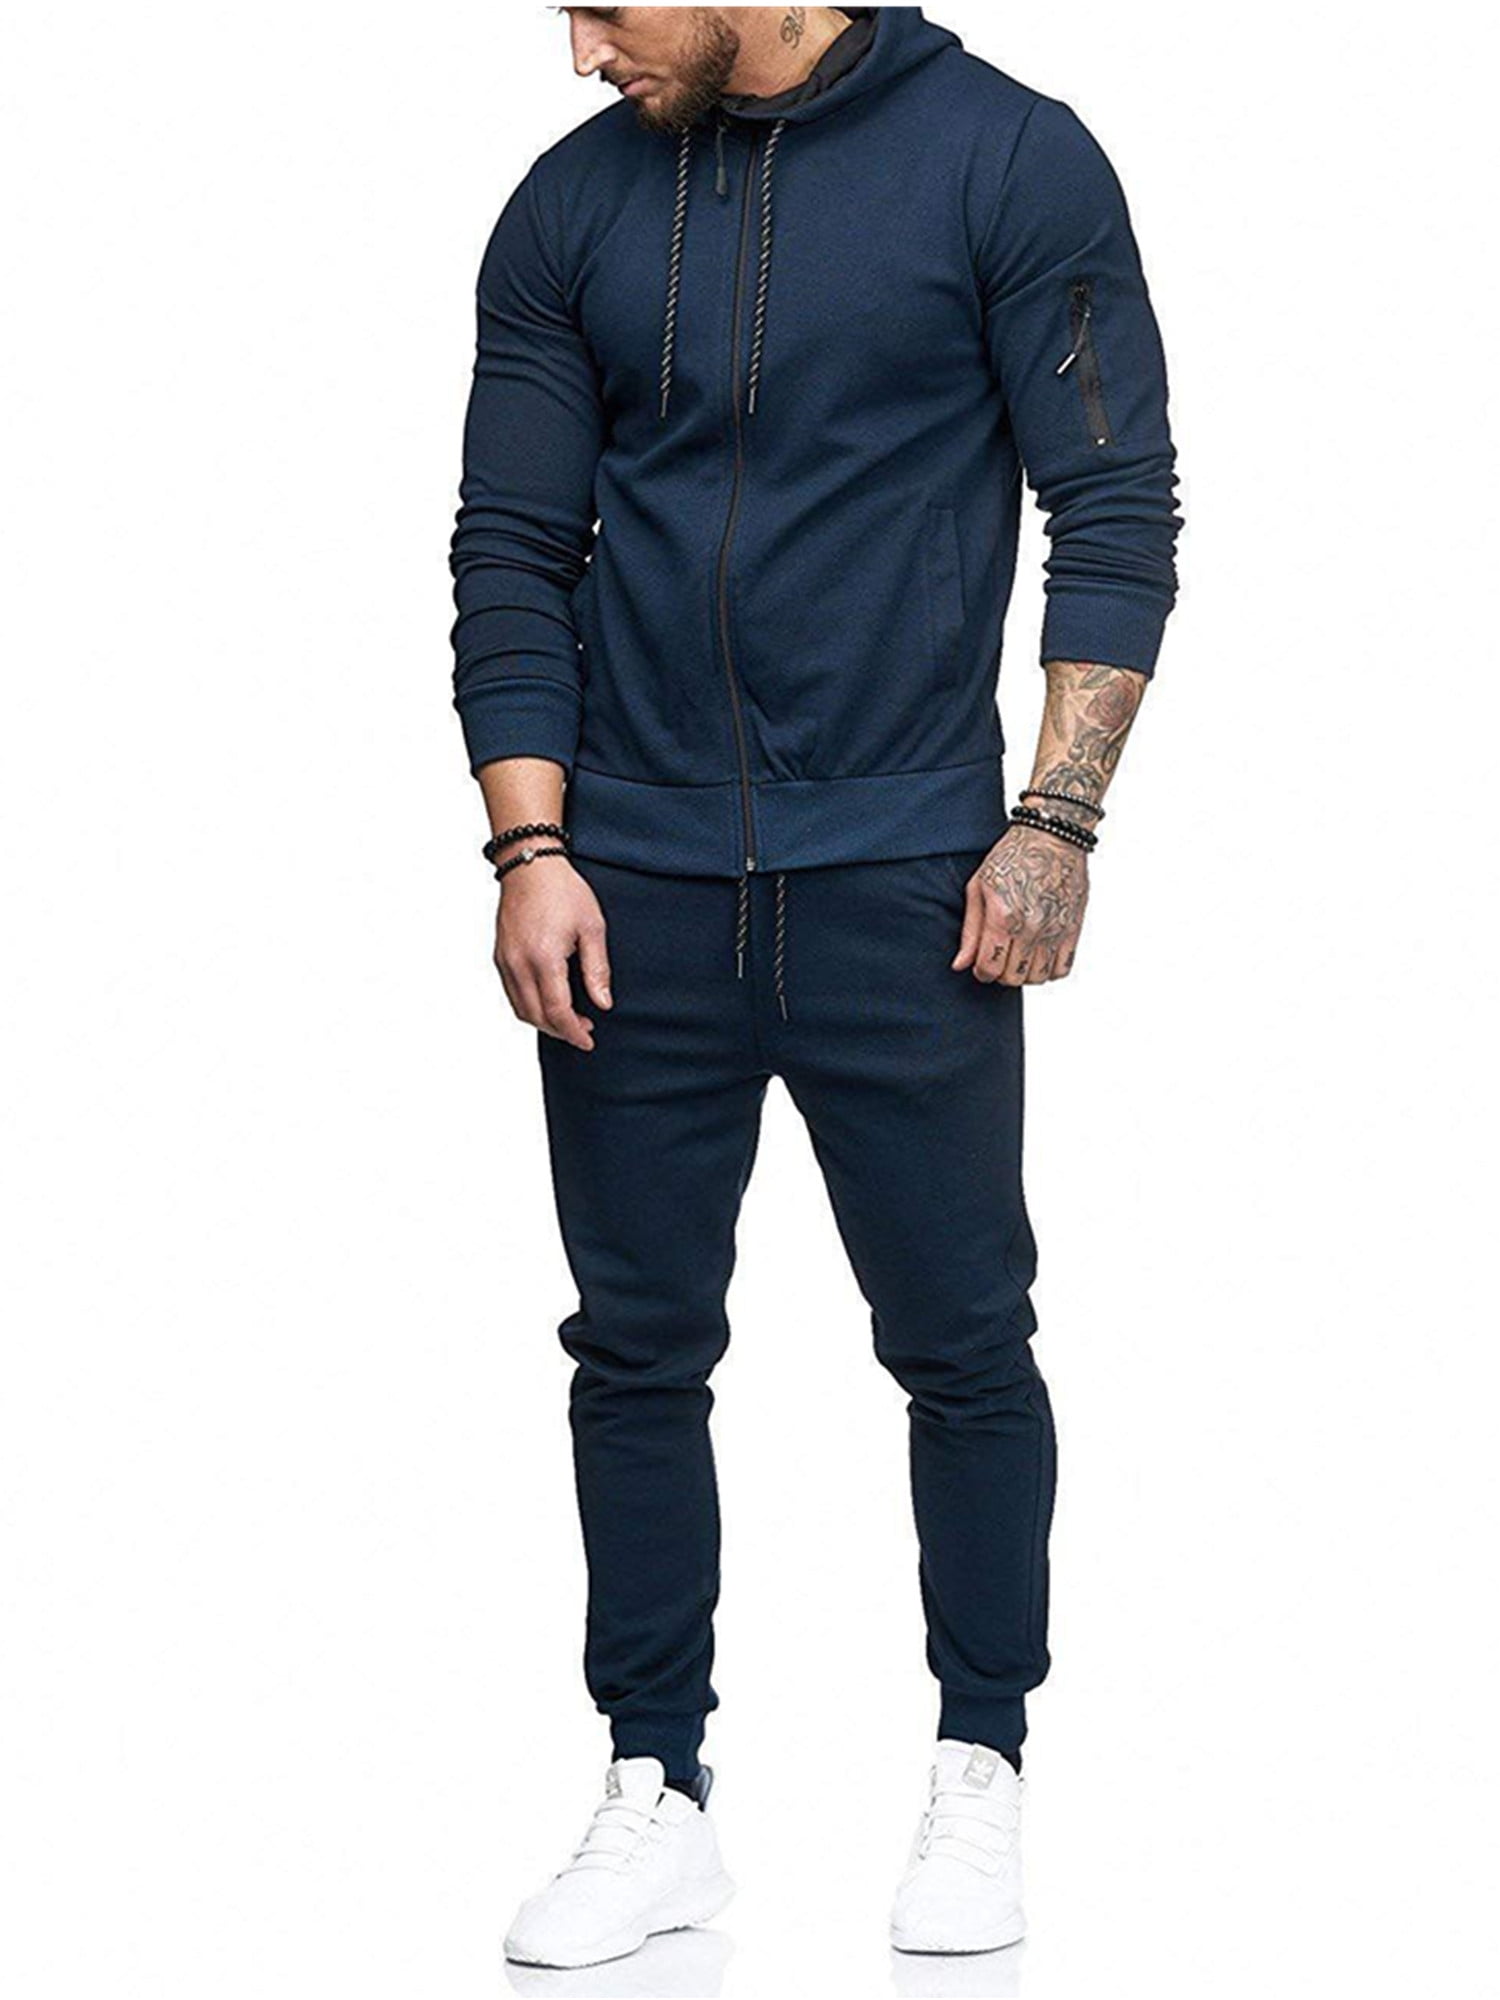 Men's Hooded Athletic Tracksuit Casual Full Zip Jogging SweatSuits 